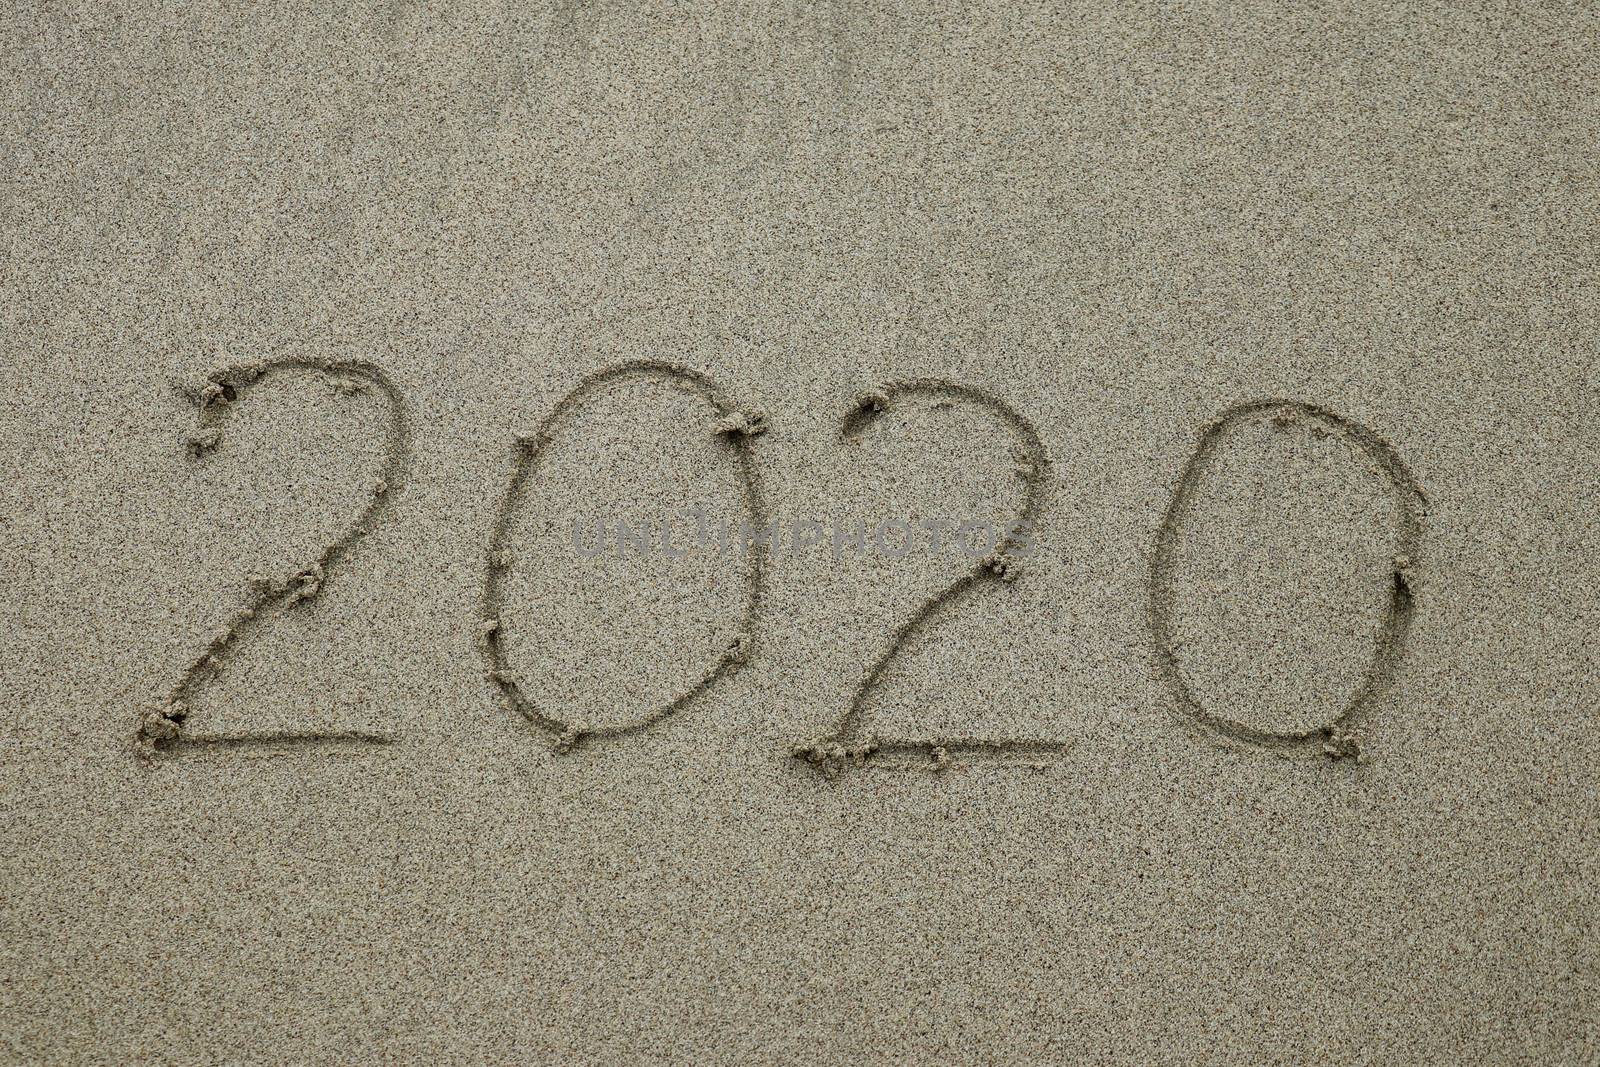 2020 drawn on the sand beach, new year concept. bye 2020 text is written by hand on the beach sand by Sanatana2008